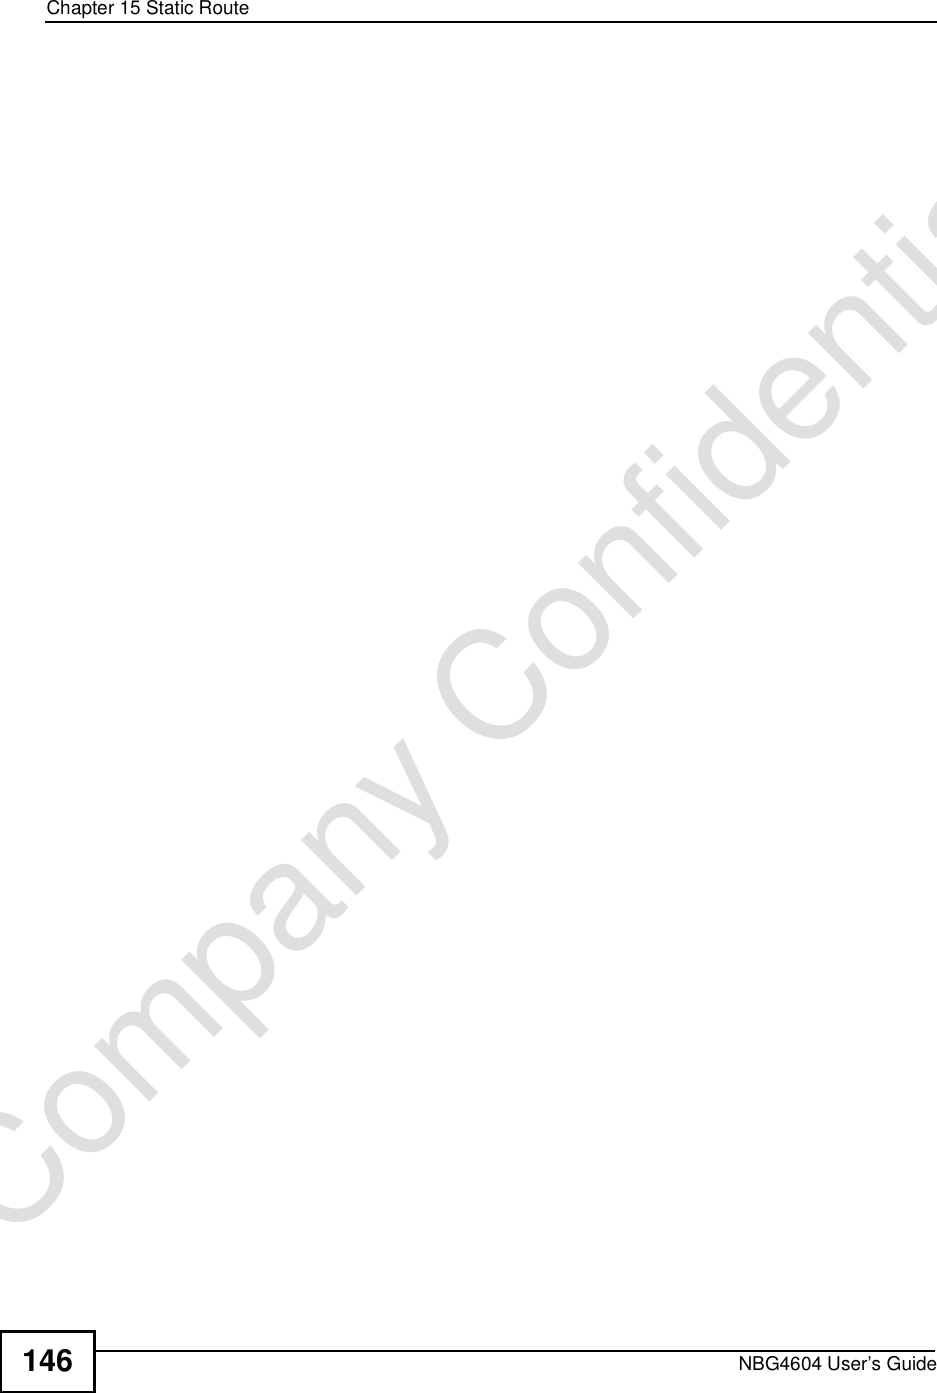 Chapter 15Static RouteNBG4604 User’s Guide146Company Confidential